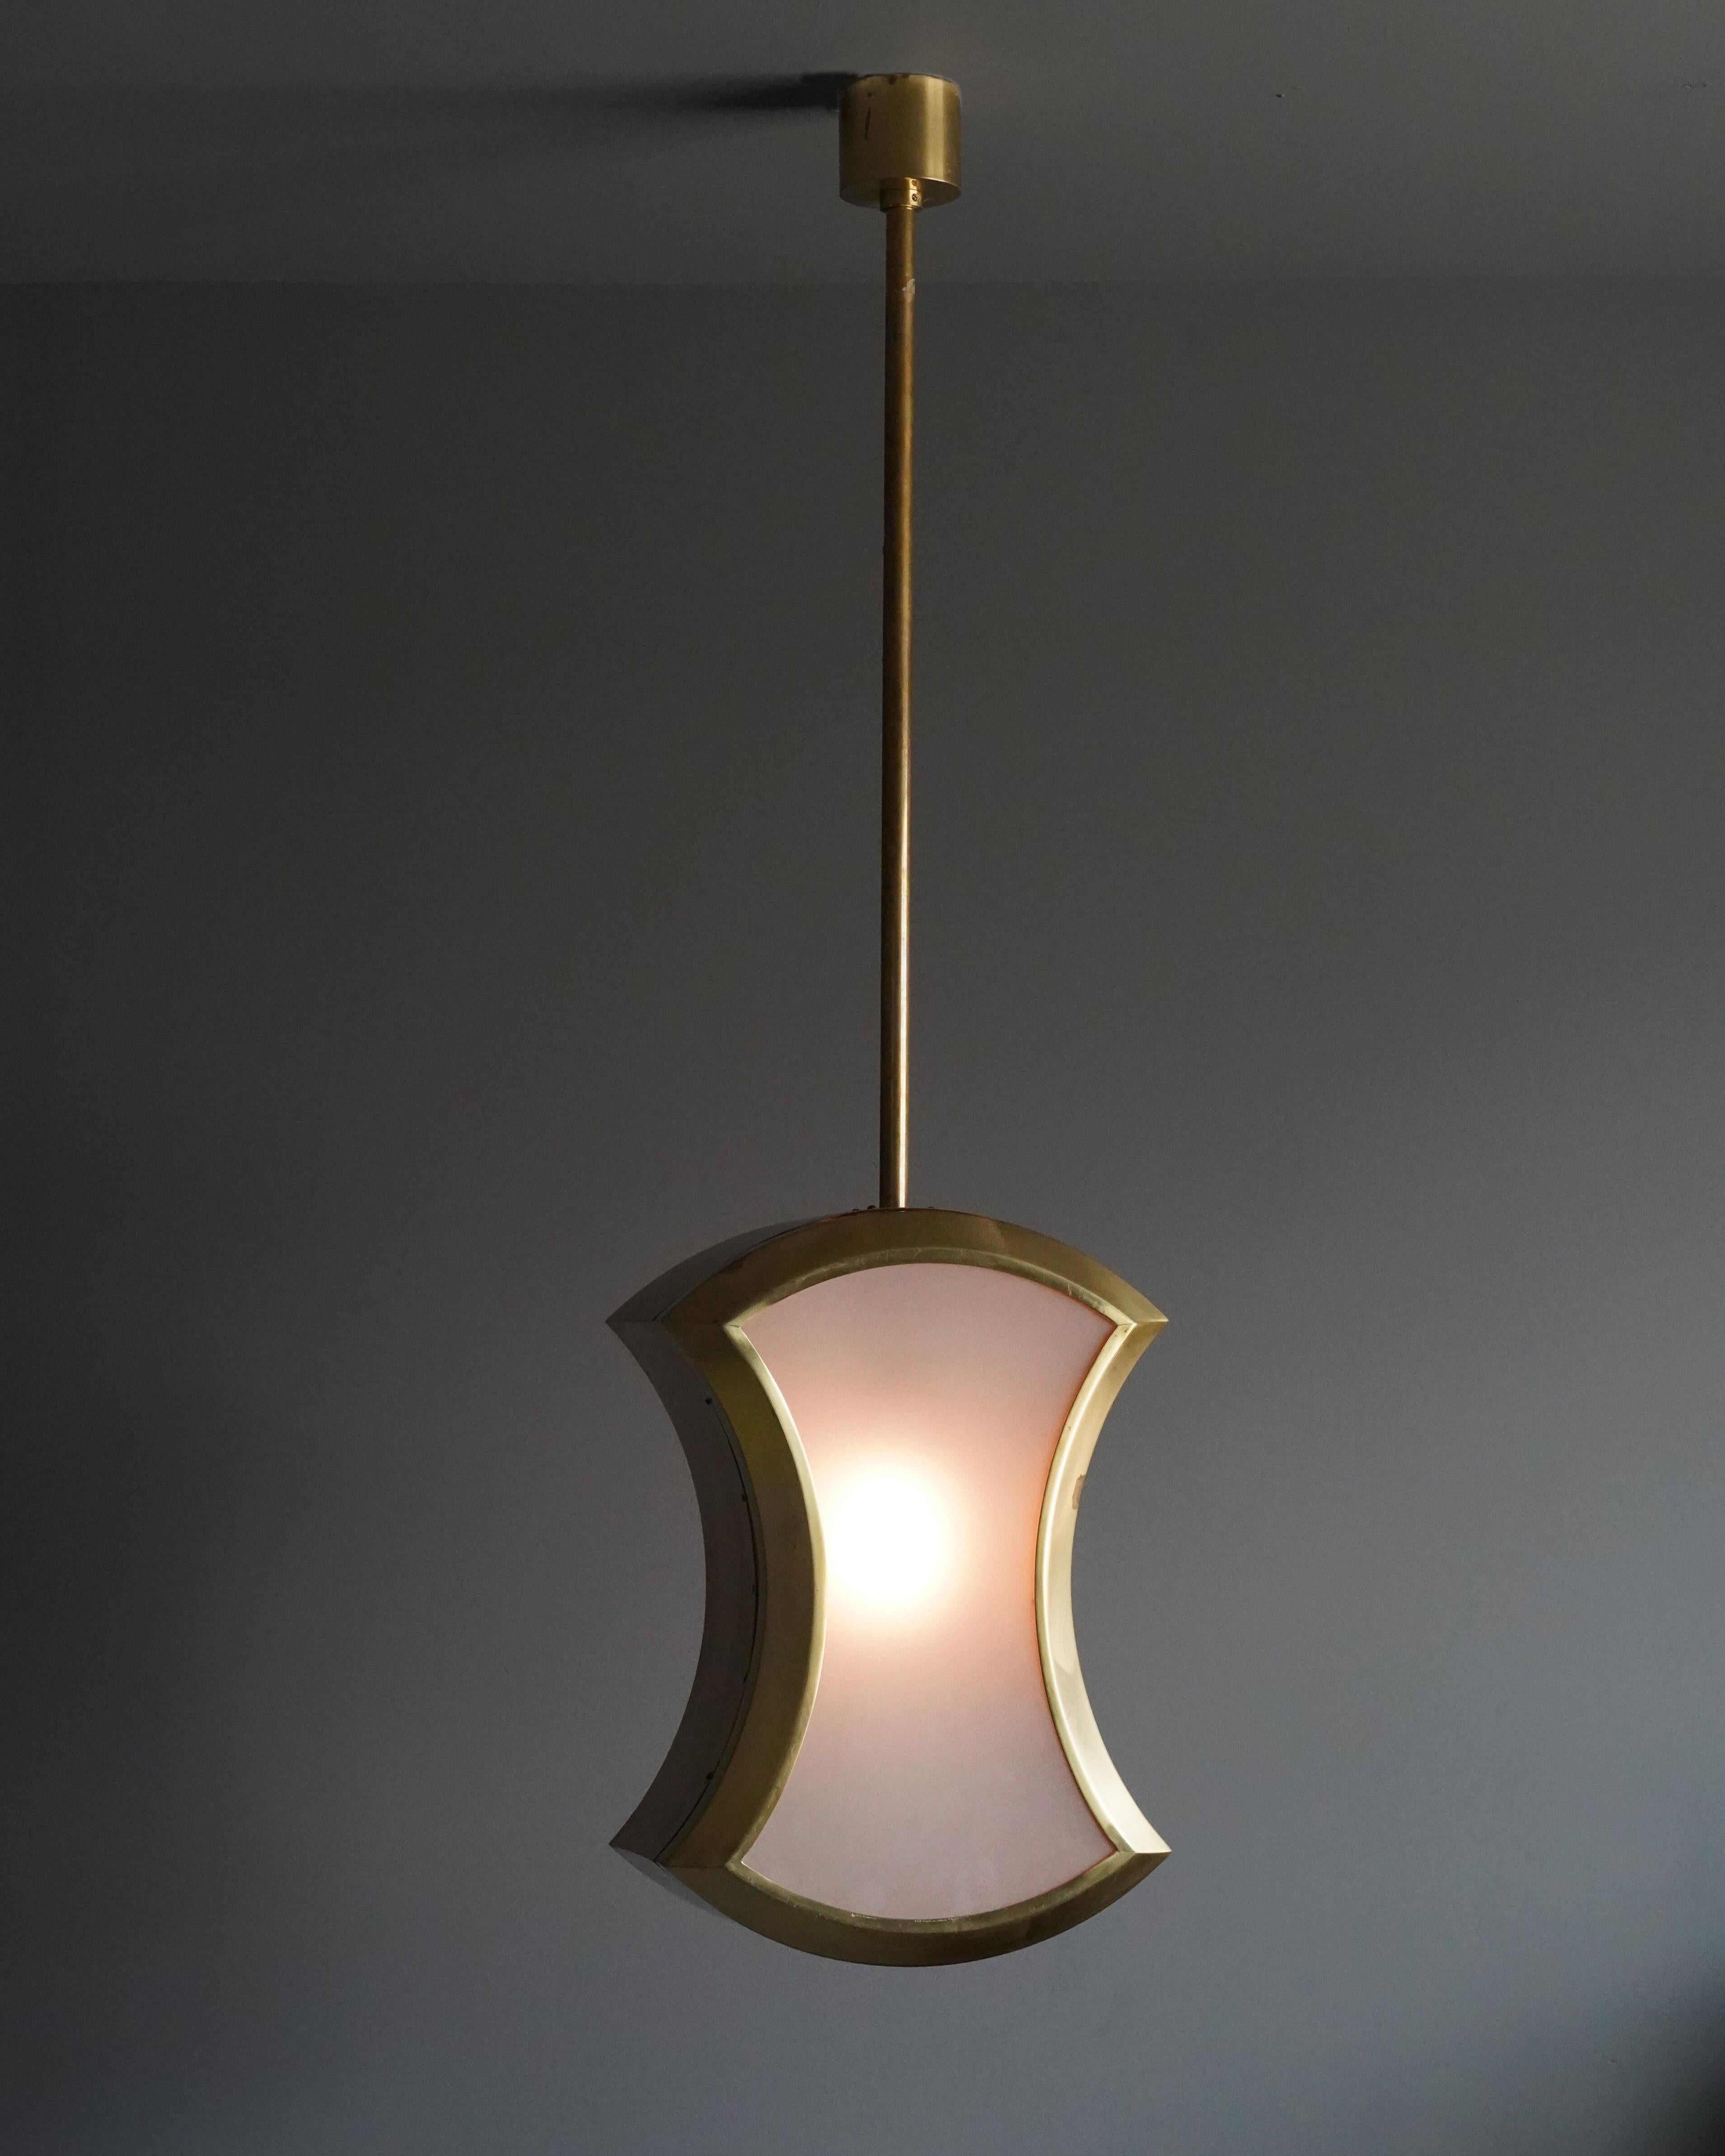 A ceiling lamp / light / pendant. Executed in brass with original fogged glass.

Other designers/makers of the period include Max Ingrand, Angelo Lelii, Fontana Arte, Stillovo and Gino Sarfatti.